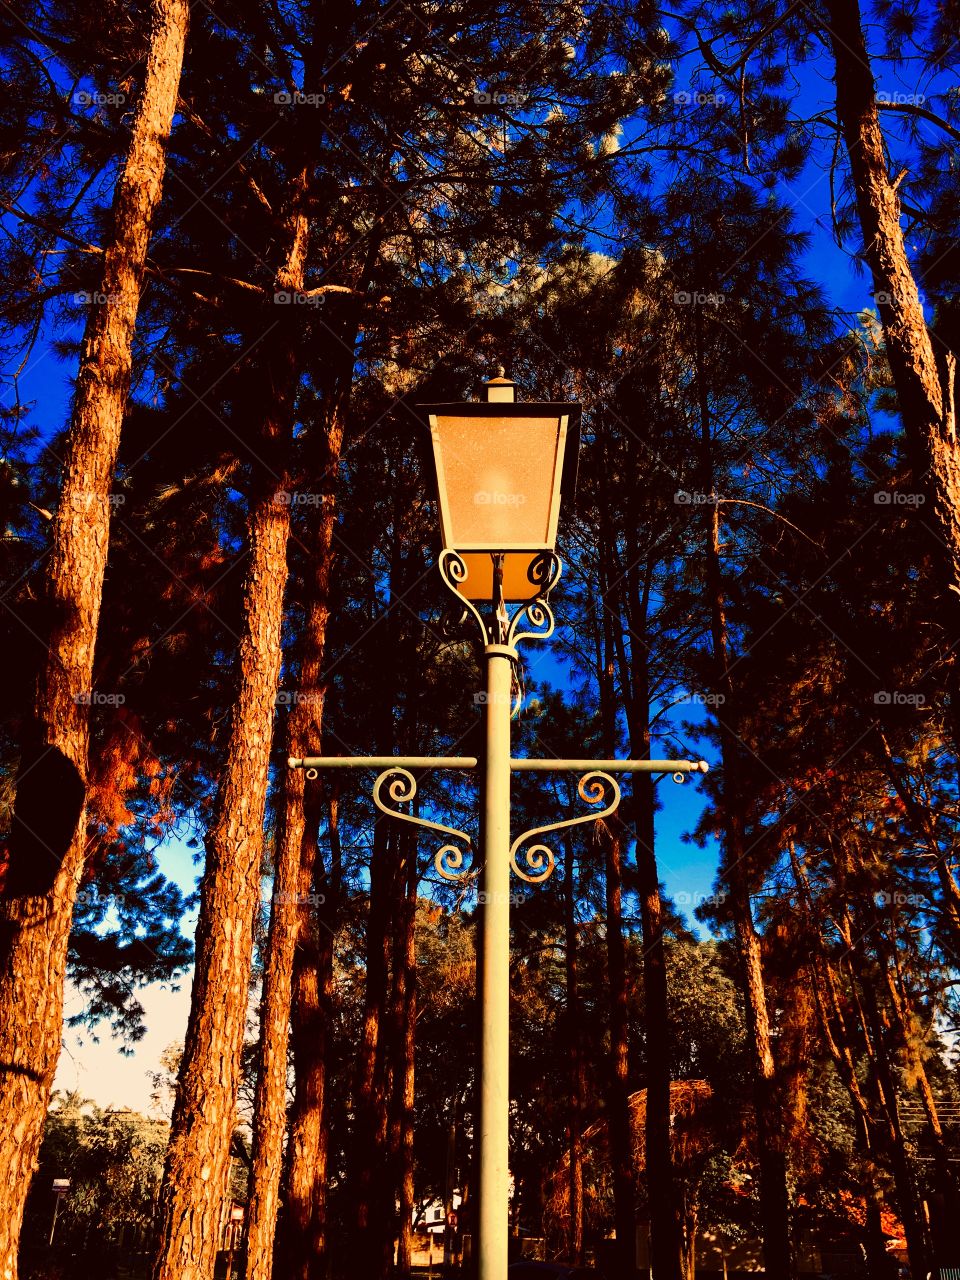 A back-to-Narnia style of lamp post surrounded by trees.